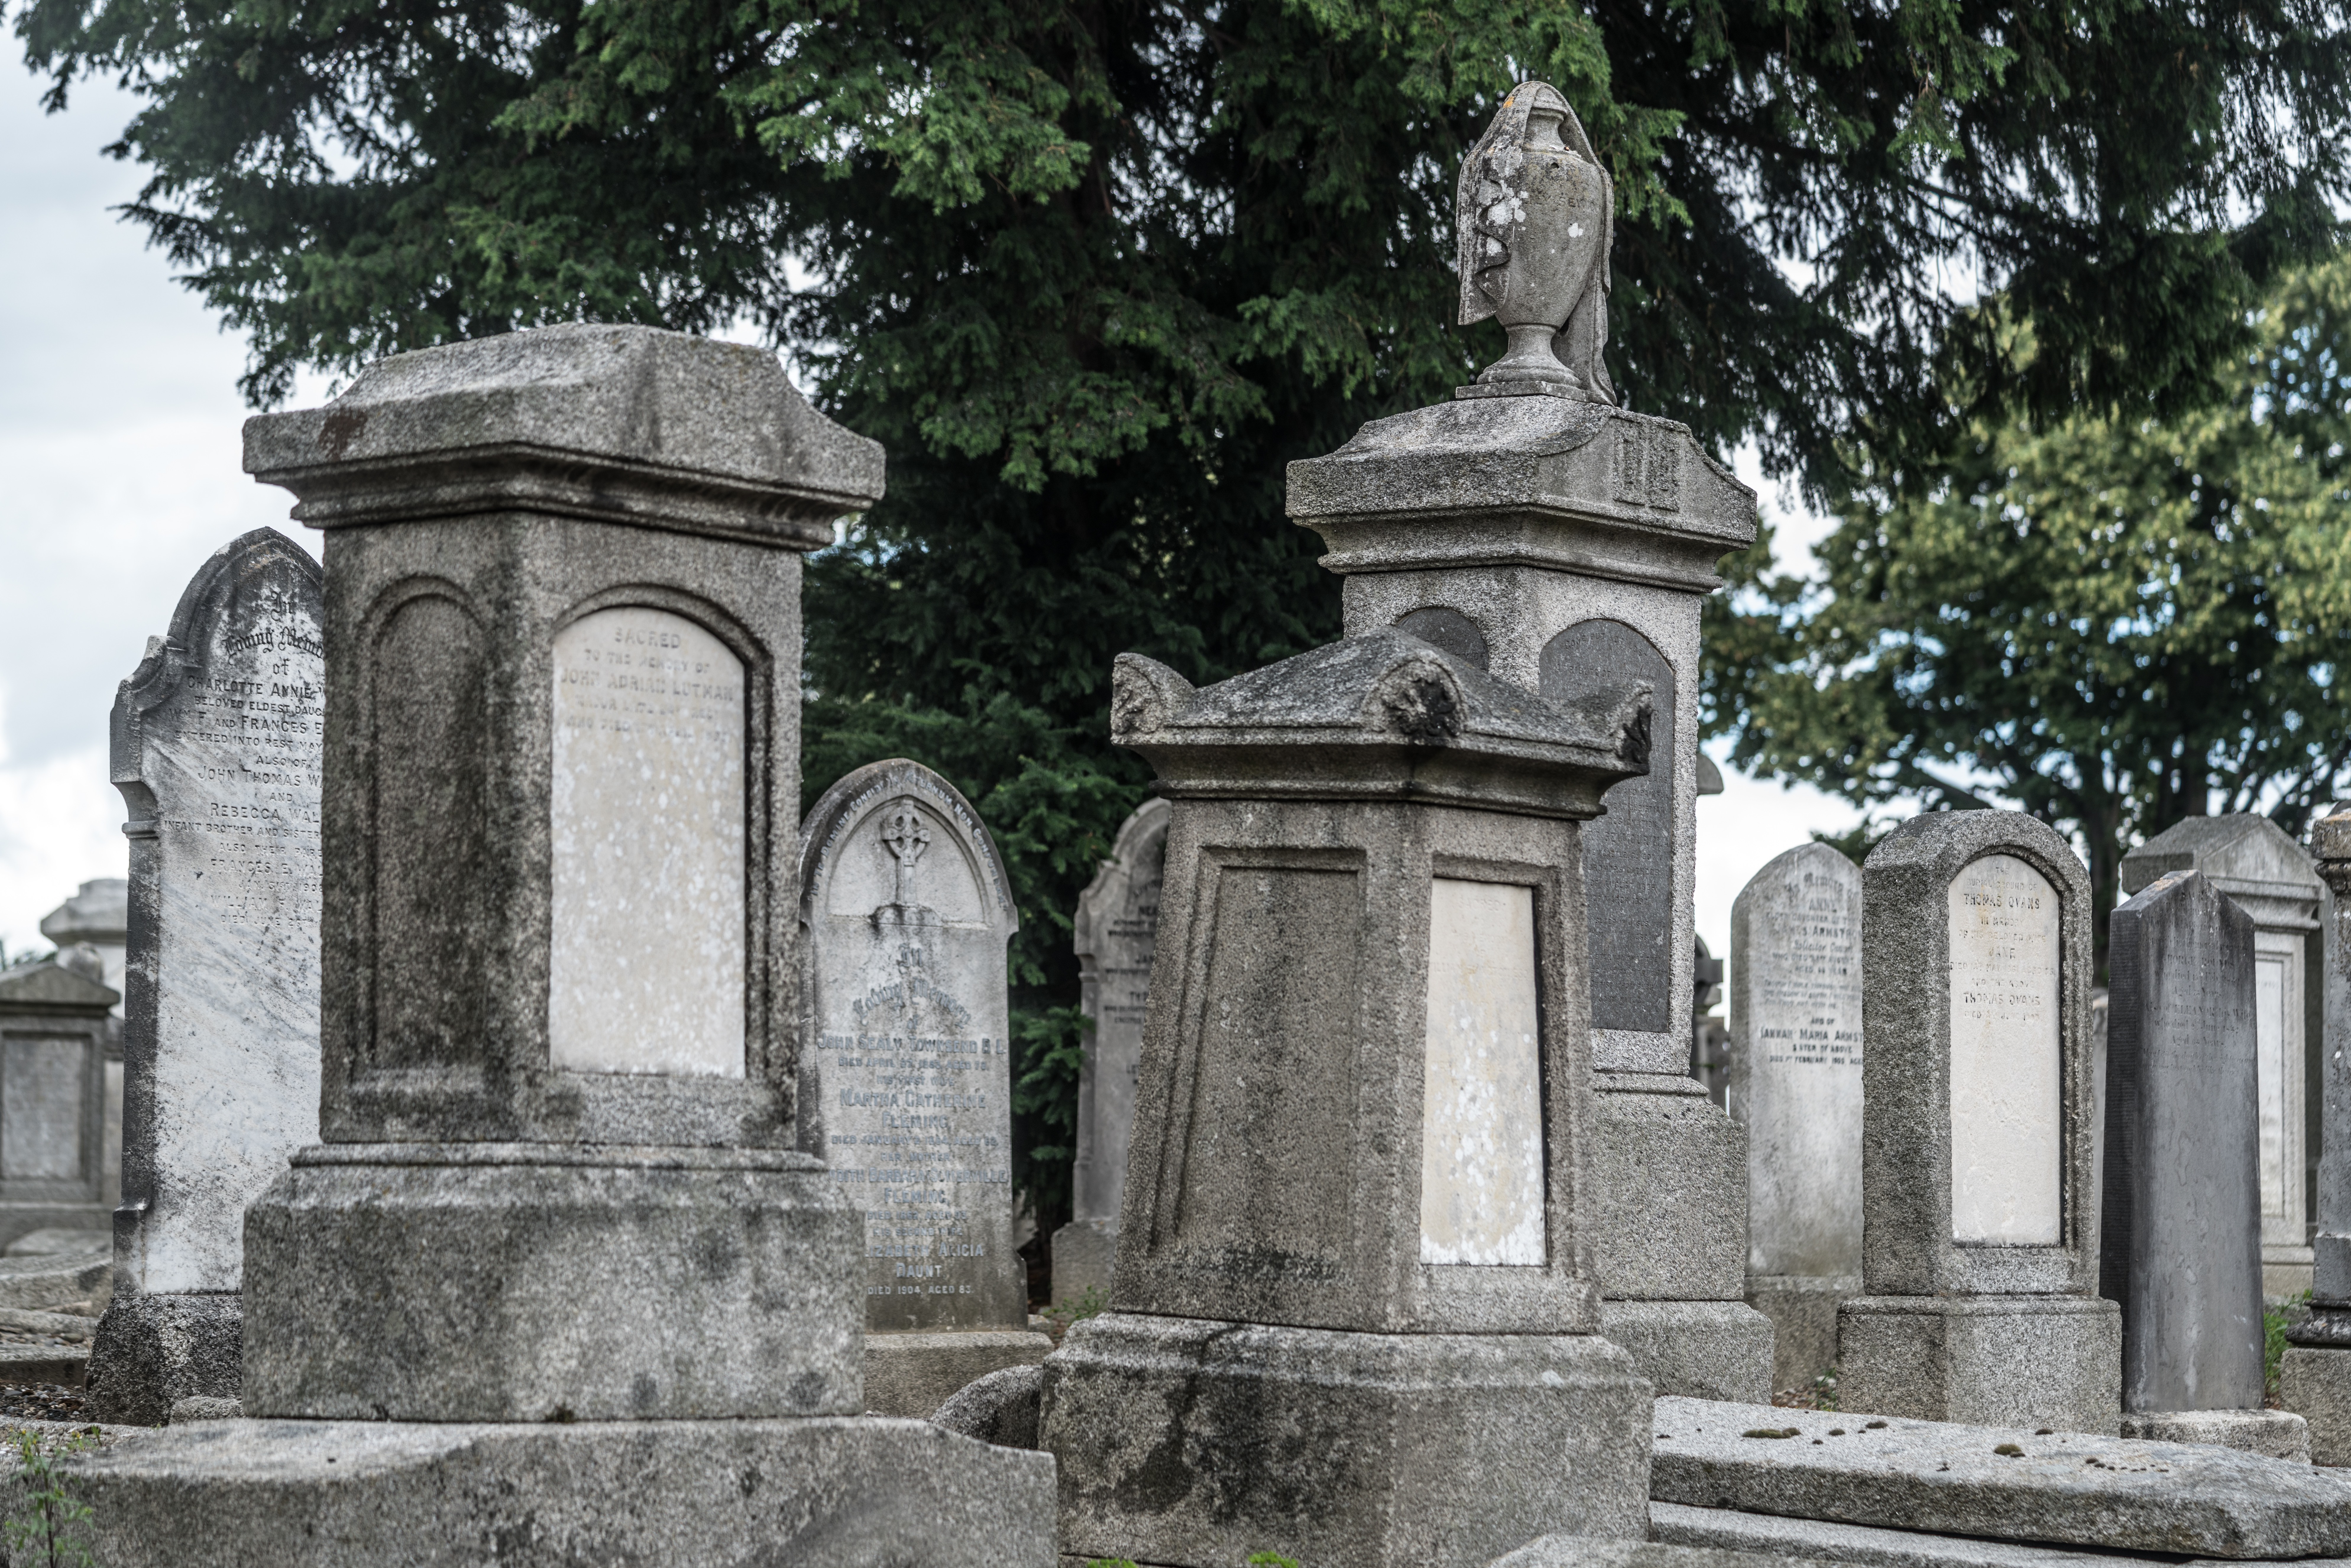  Mount Jerome Cemetery - August 2017 002 